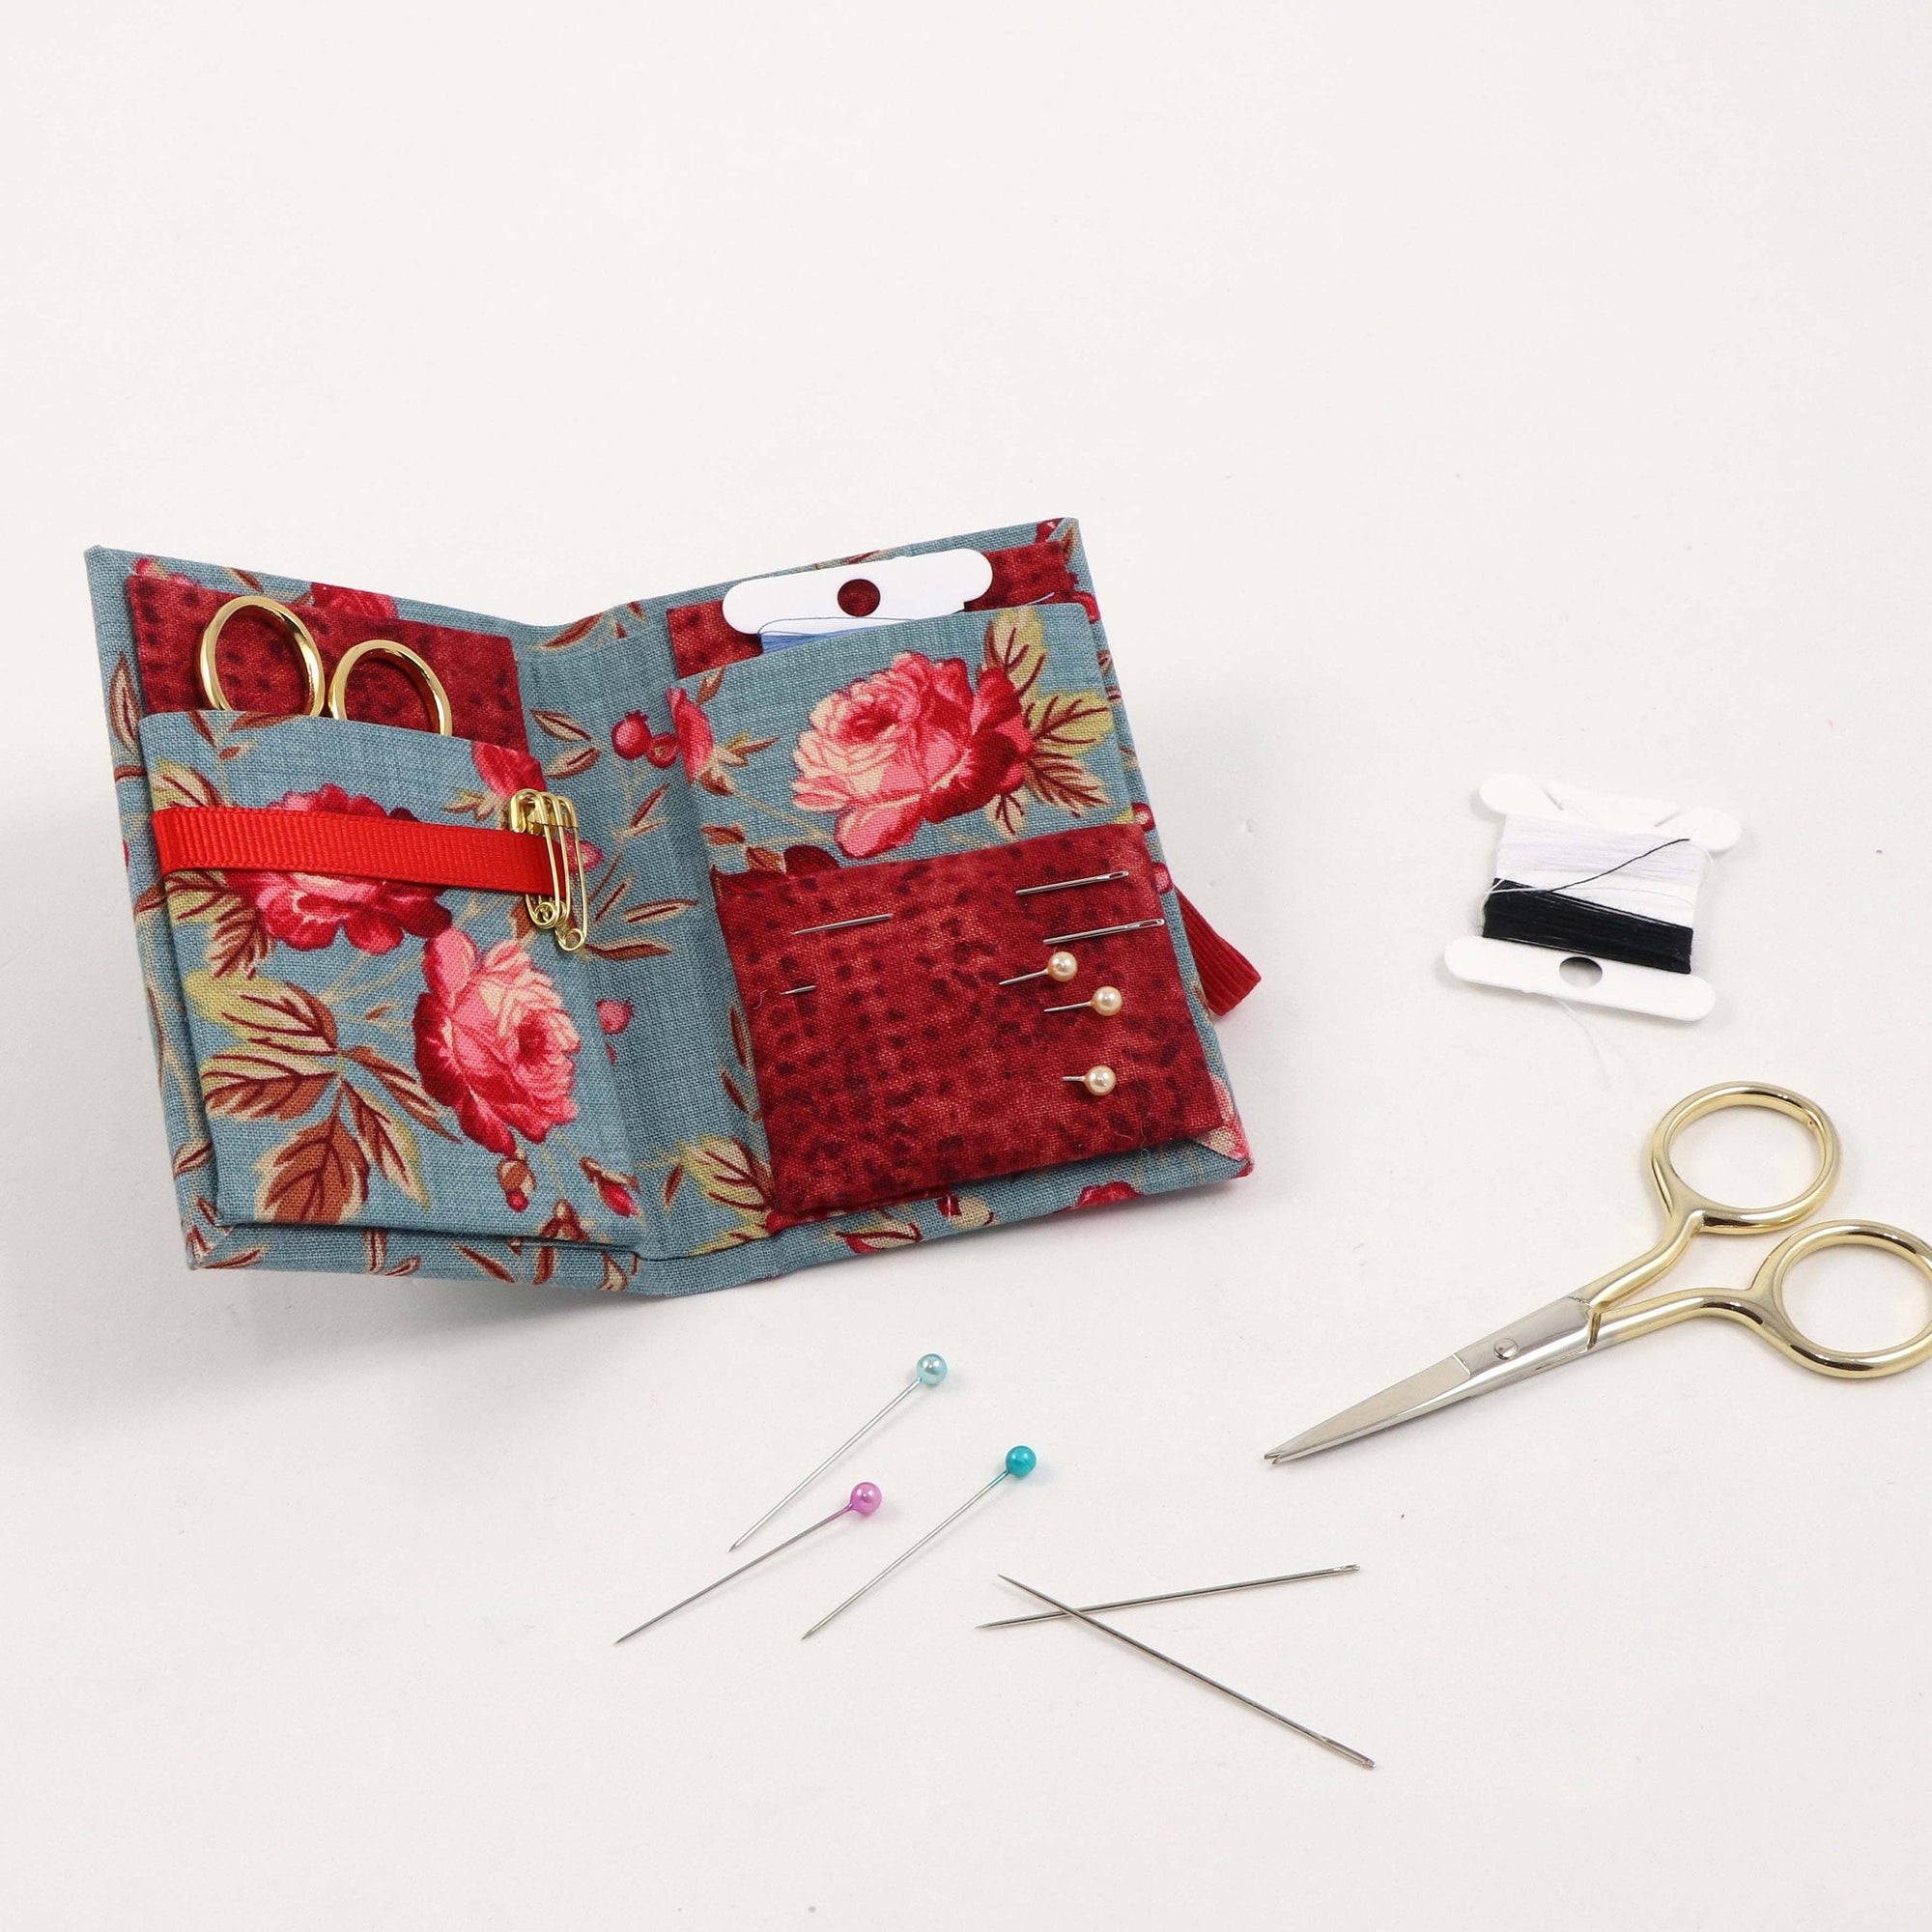 Products Tagged DIY sewing kit - Colorway Arts